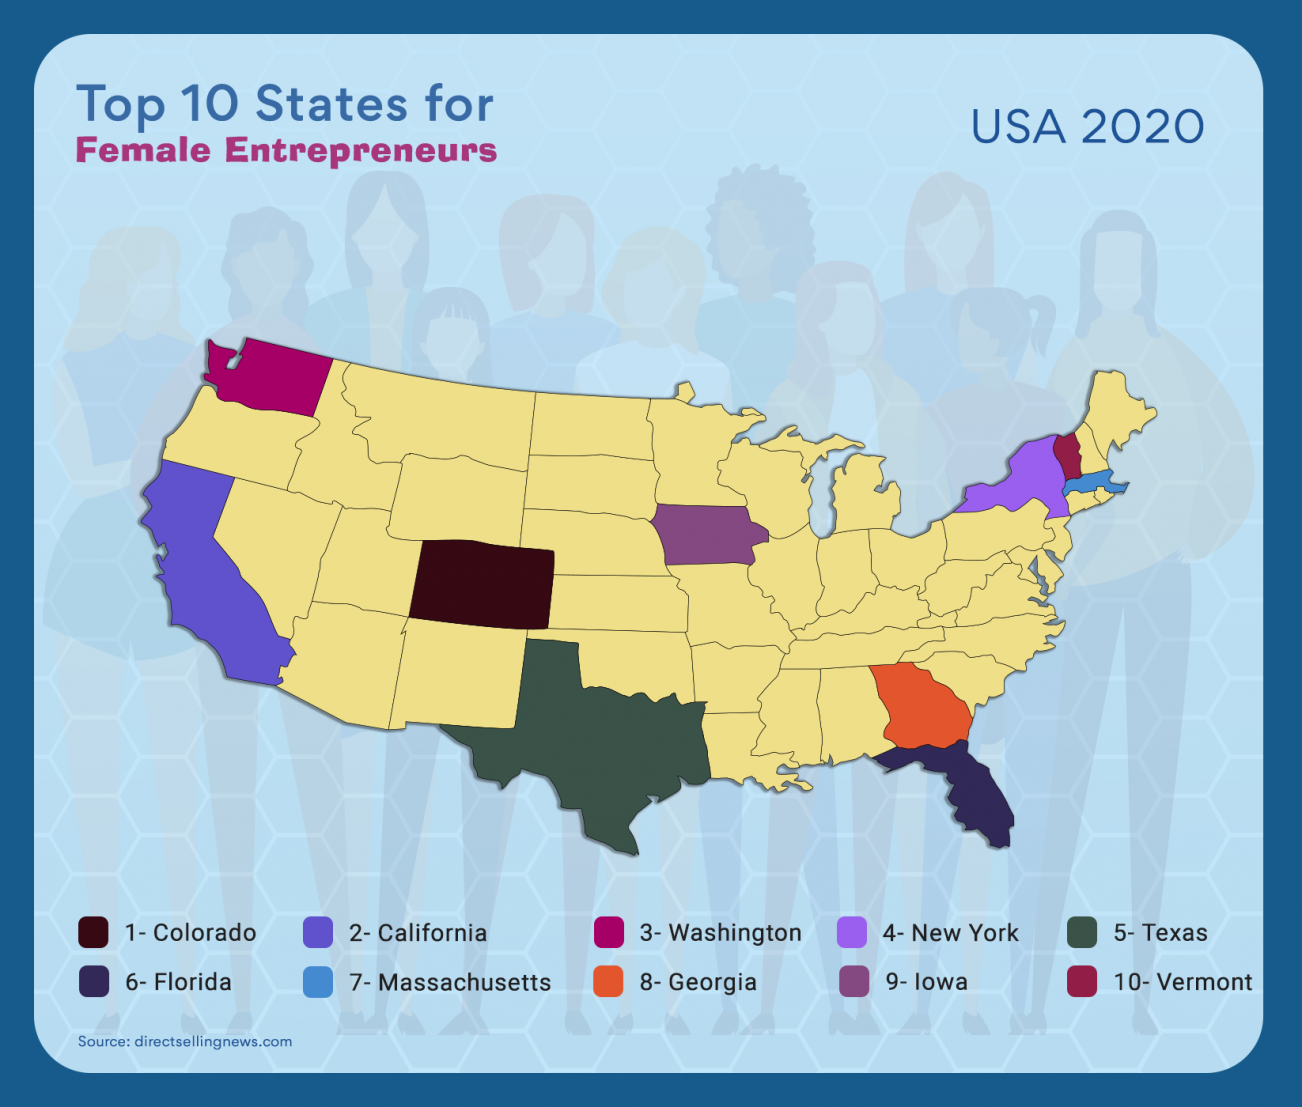 Top 10 states for female entrepreneurs in the US